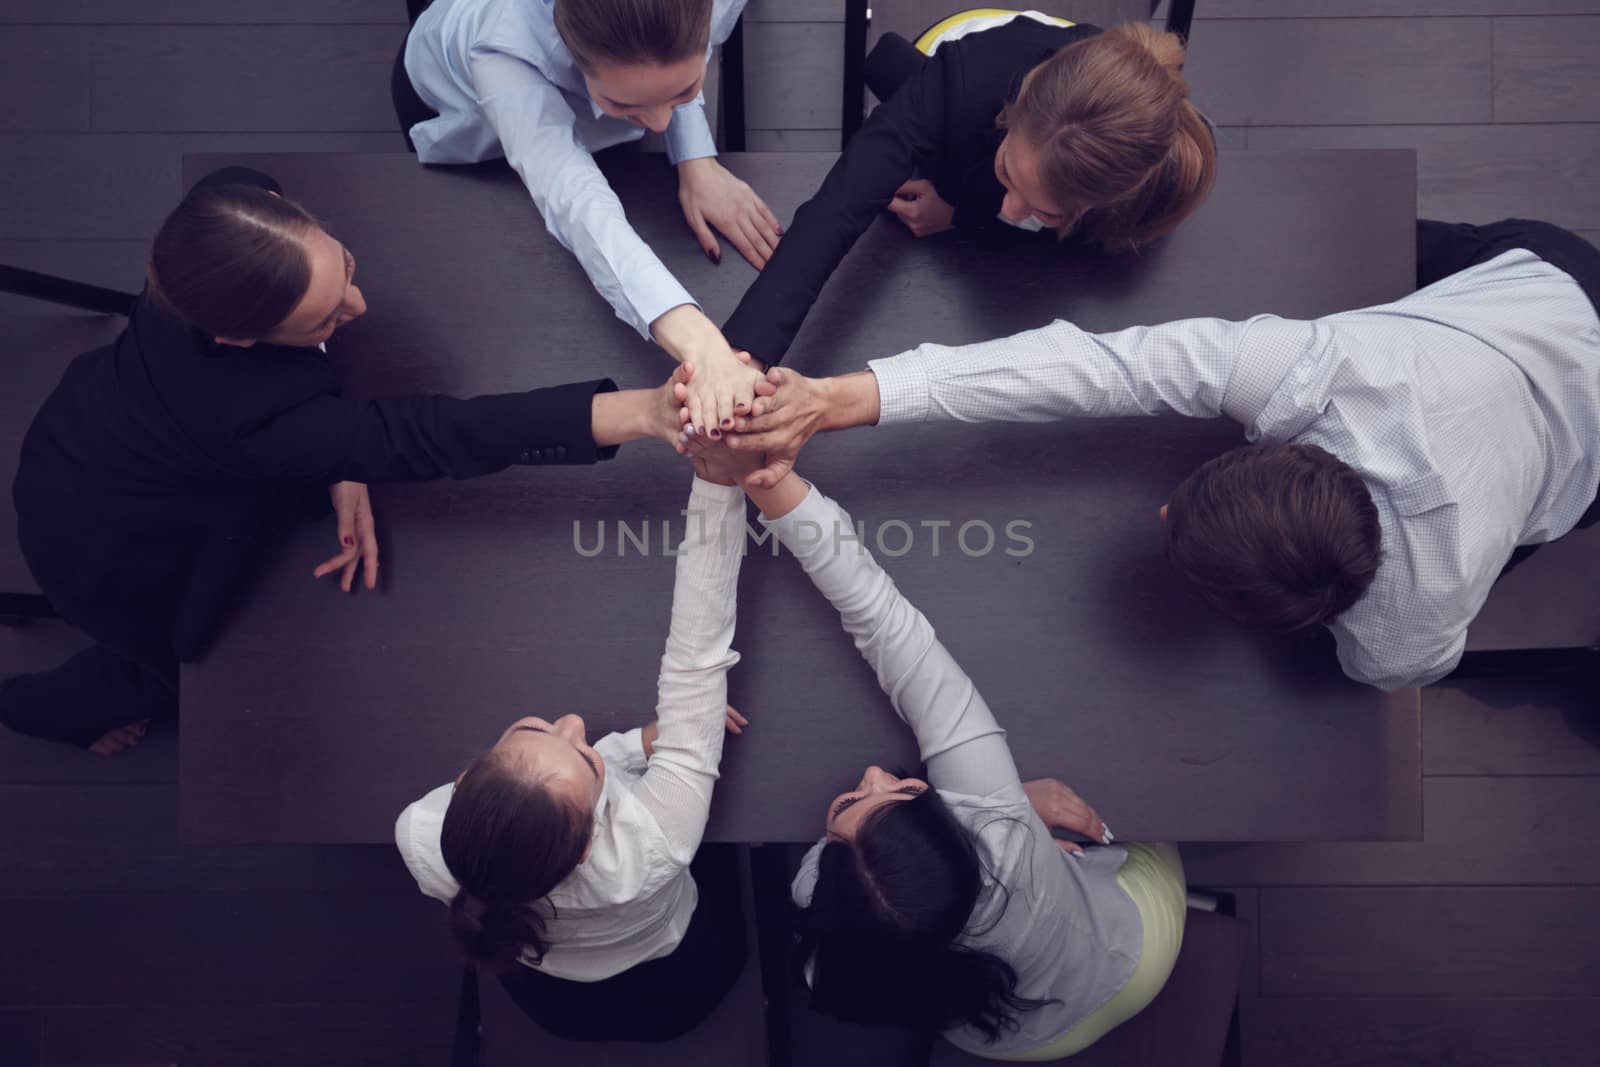 People with their hands together. Business team work concept